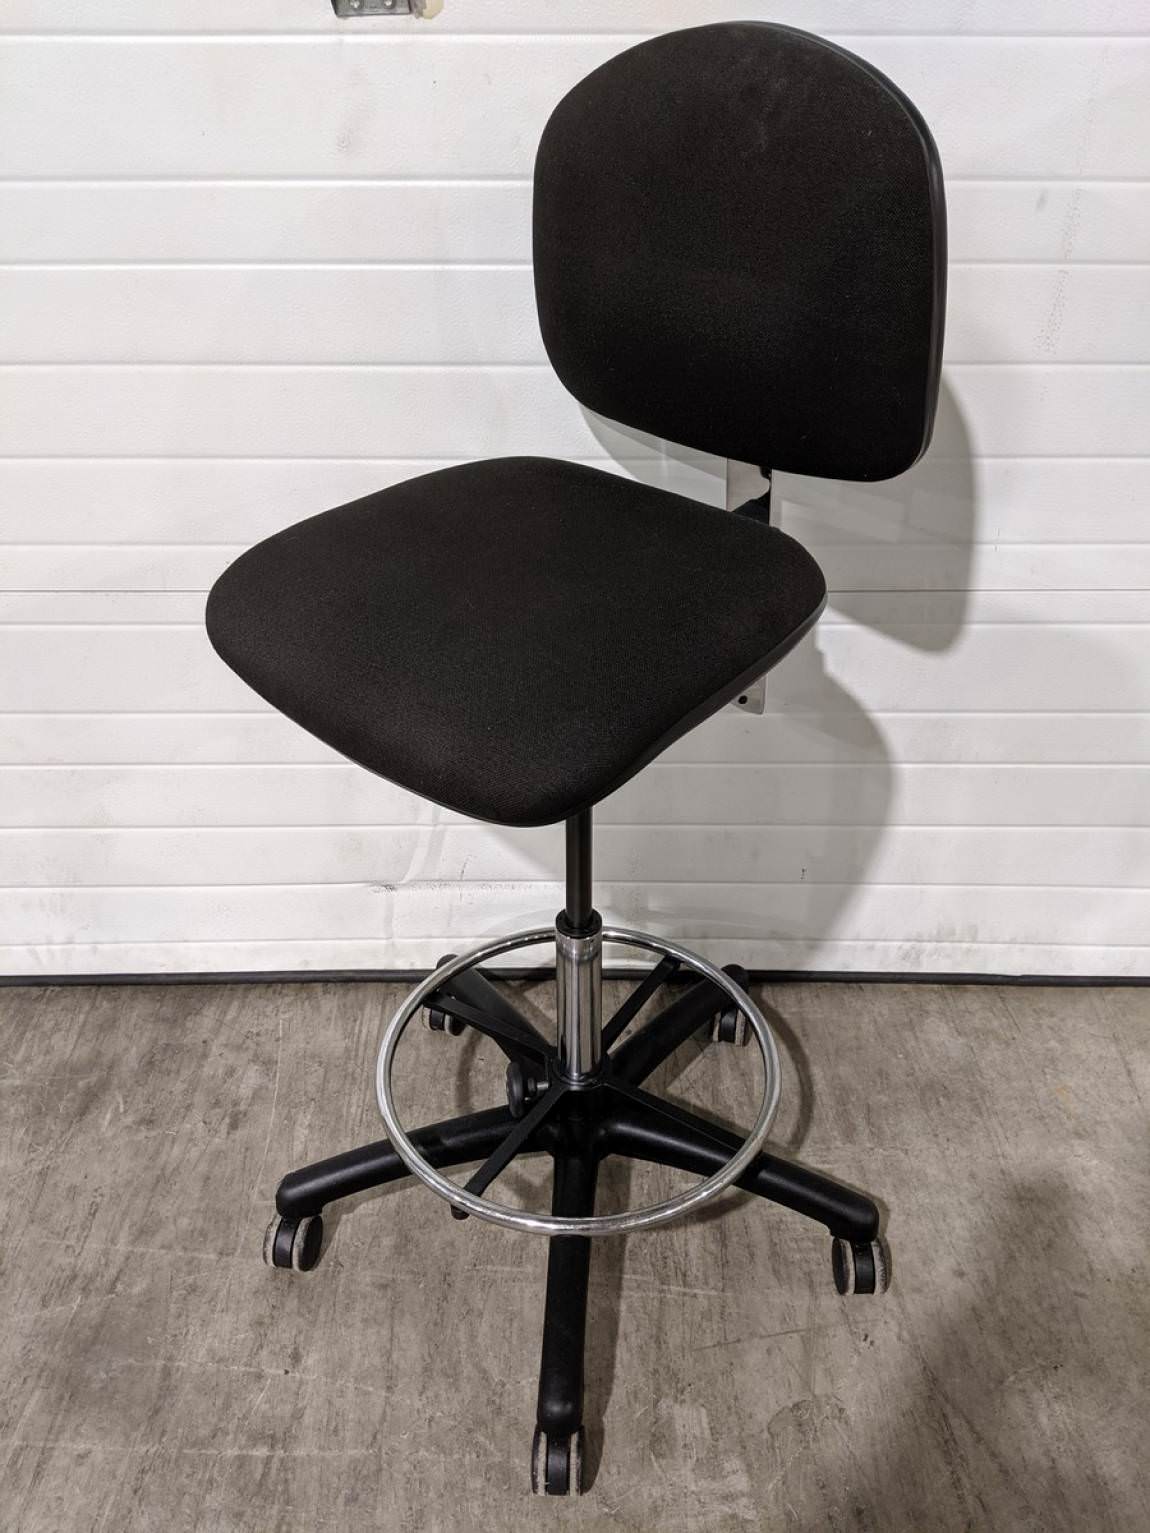 BenchPro Black Low-Back Rolling Office Stool Chair